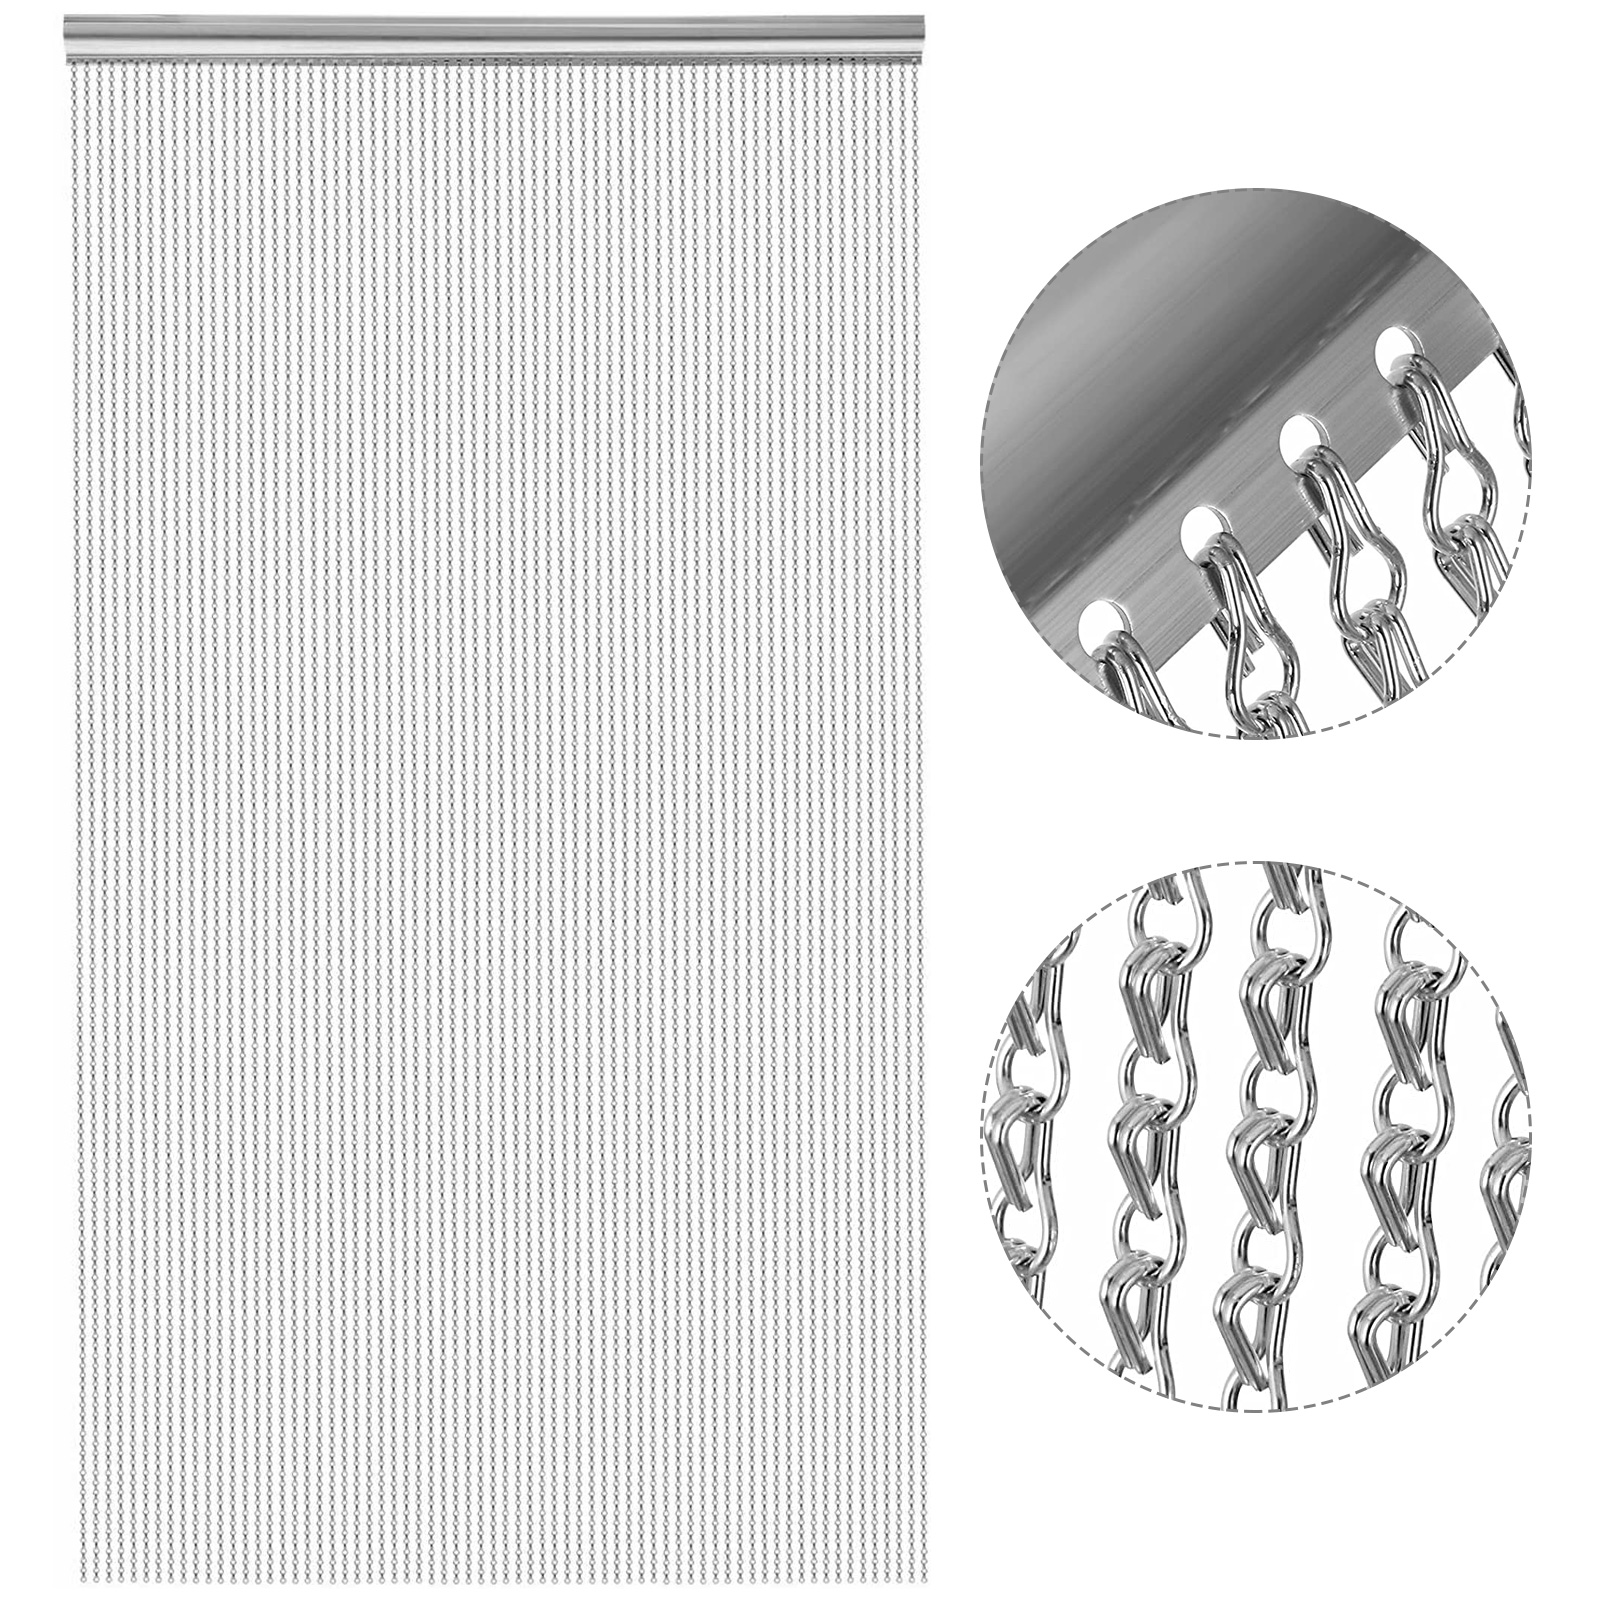 3ft Aluminium Chain Strip Curtain Fly Pest Insect Control Decoration Door Screen 